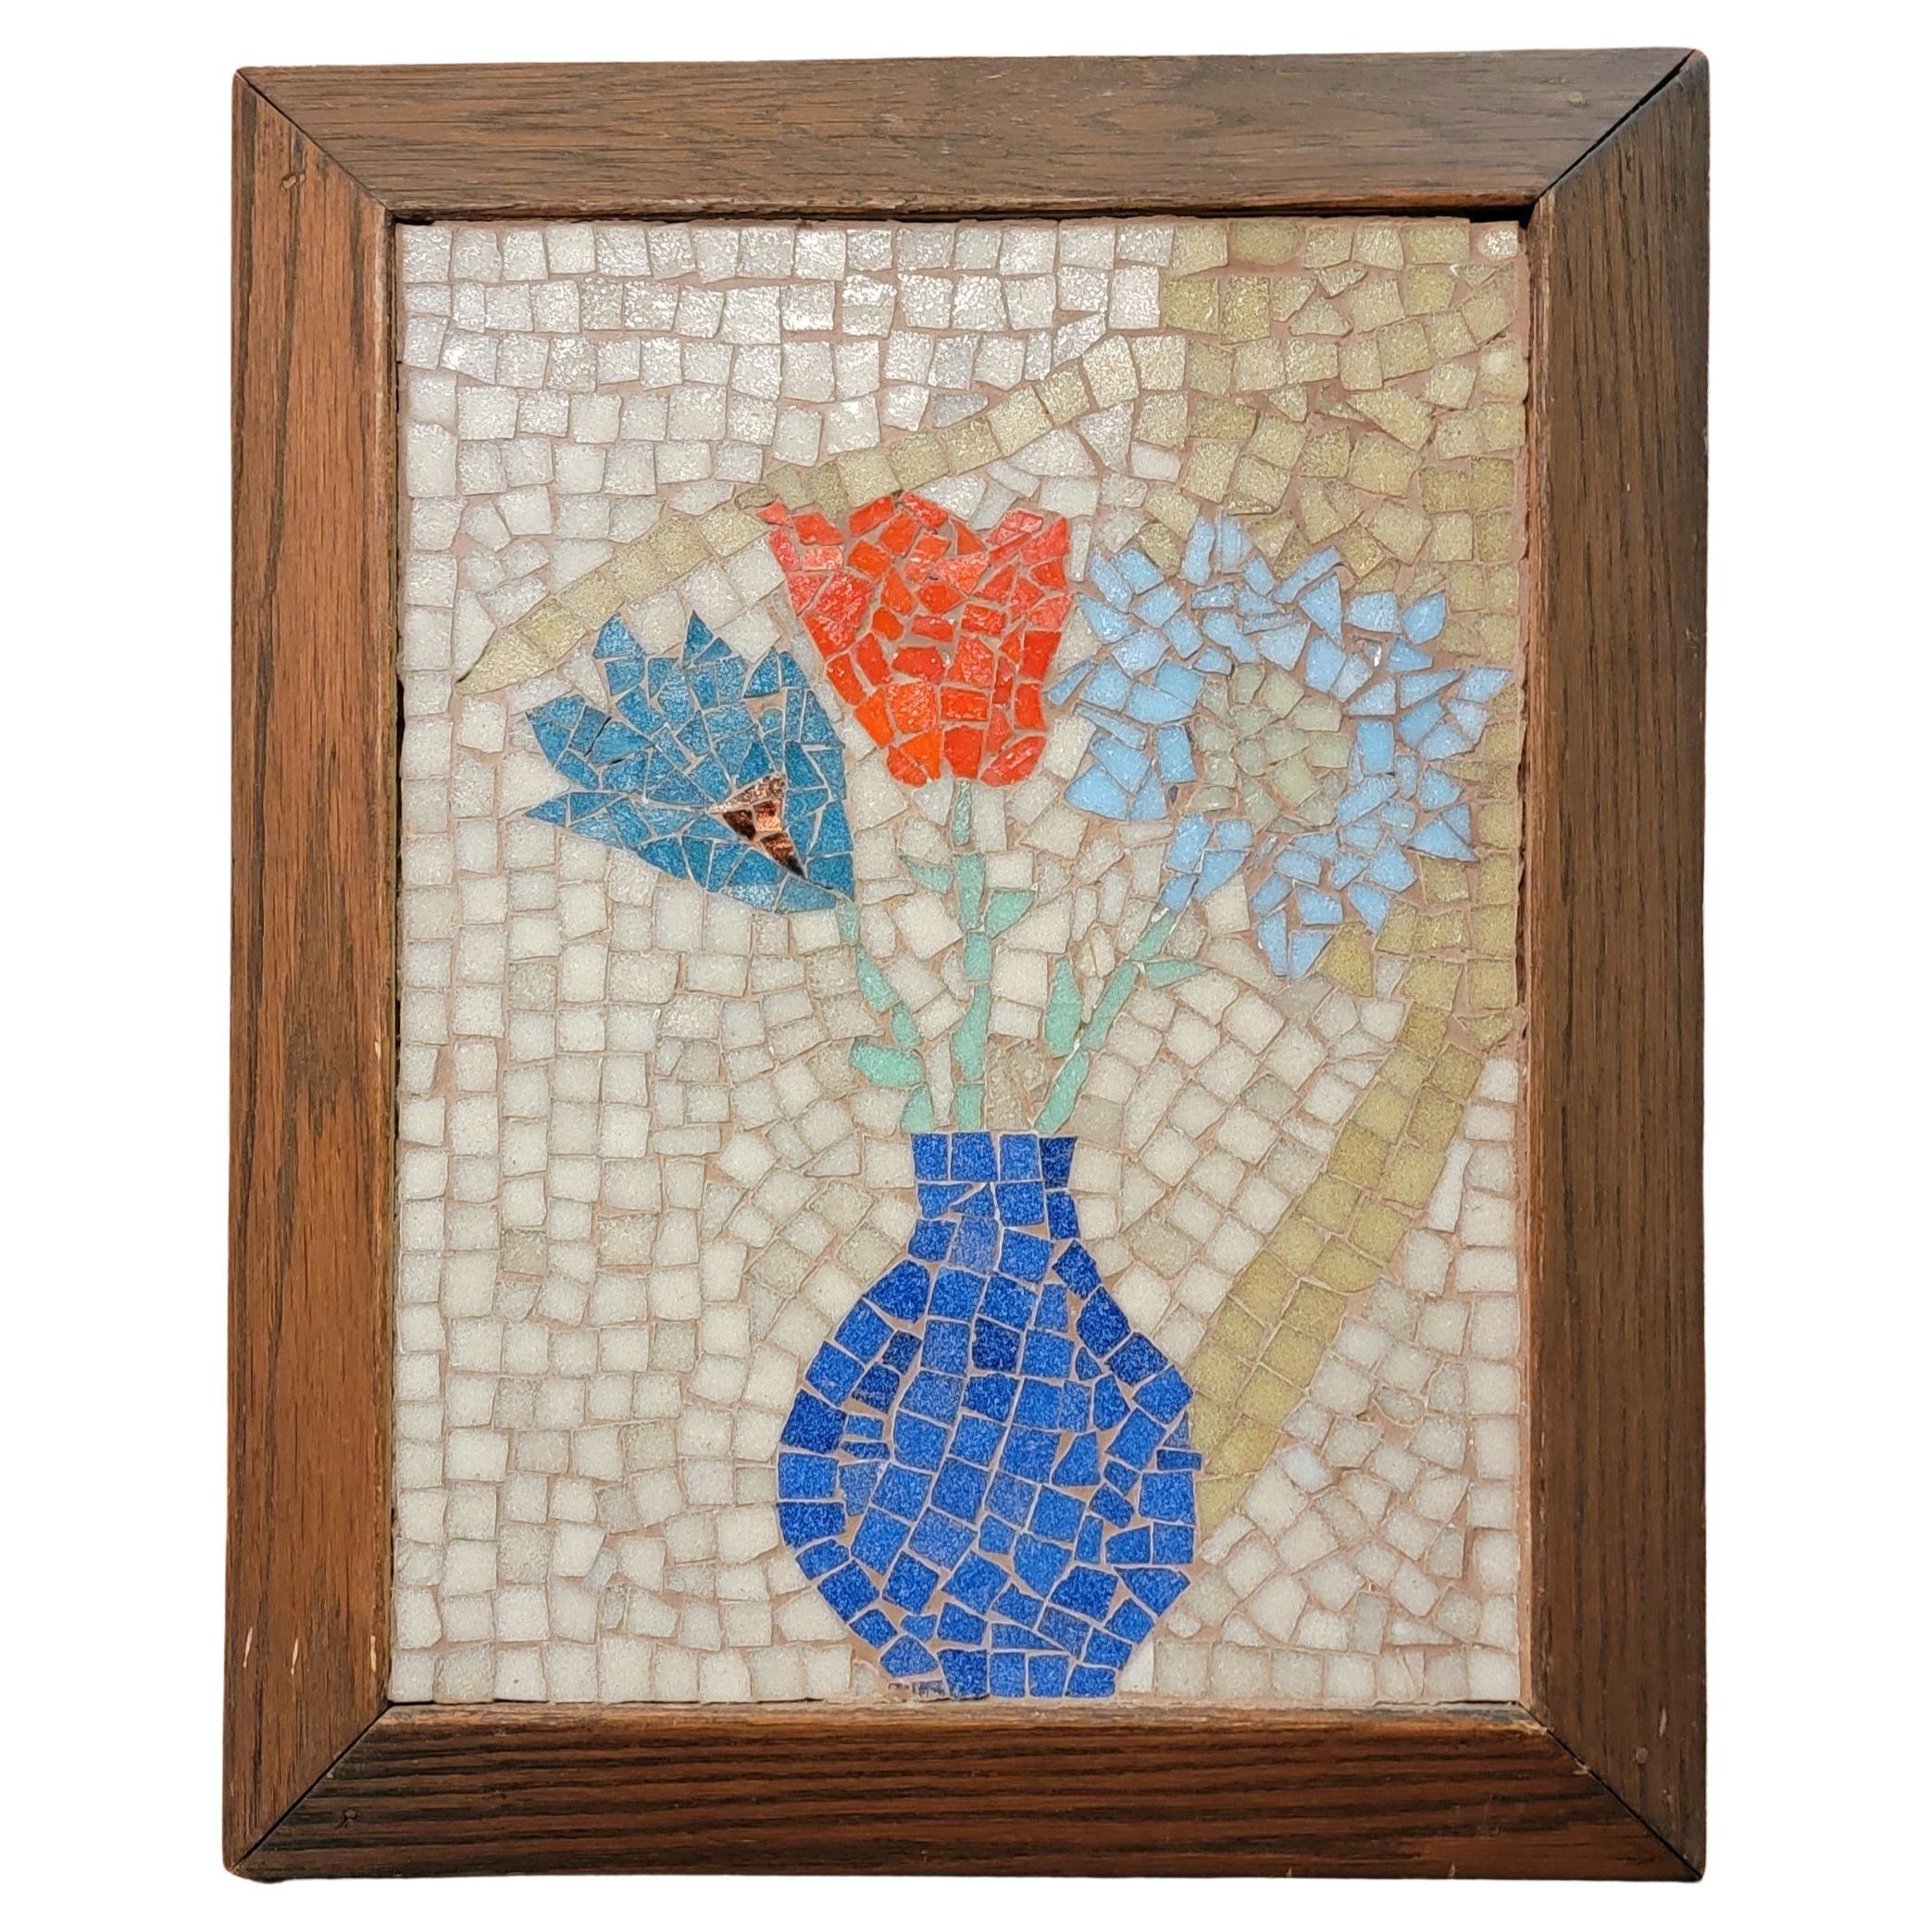 Floral Mosaic Tile Wall Hanging / Plaque For Sale